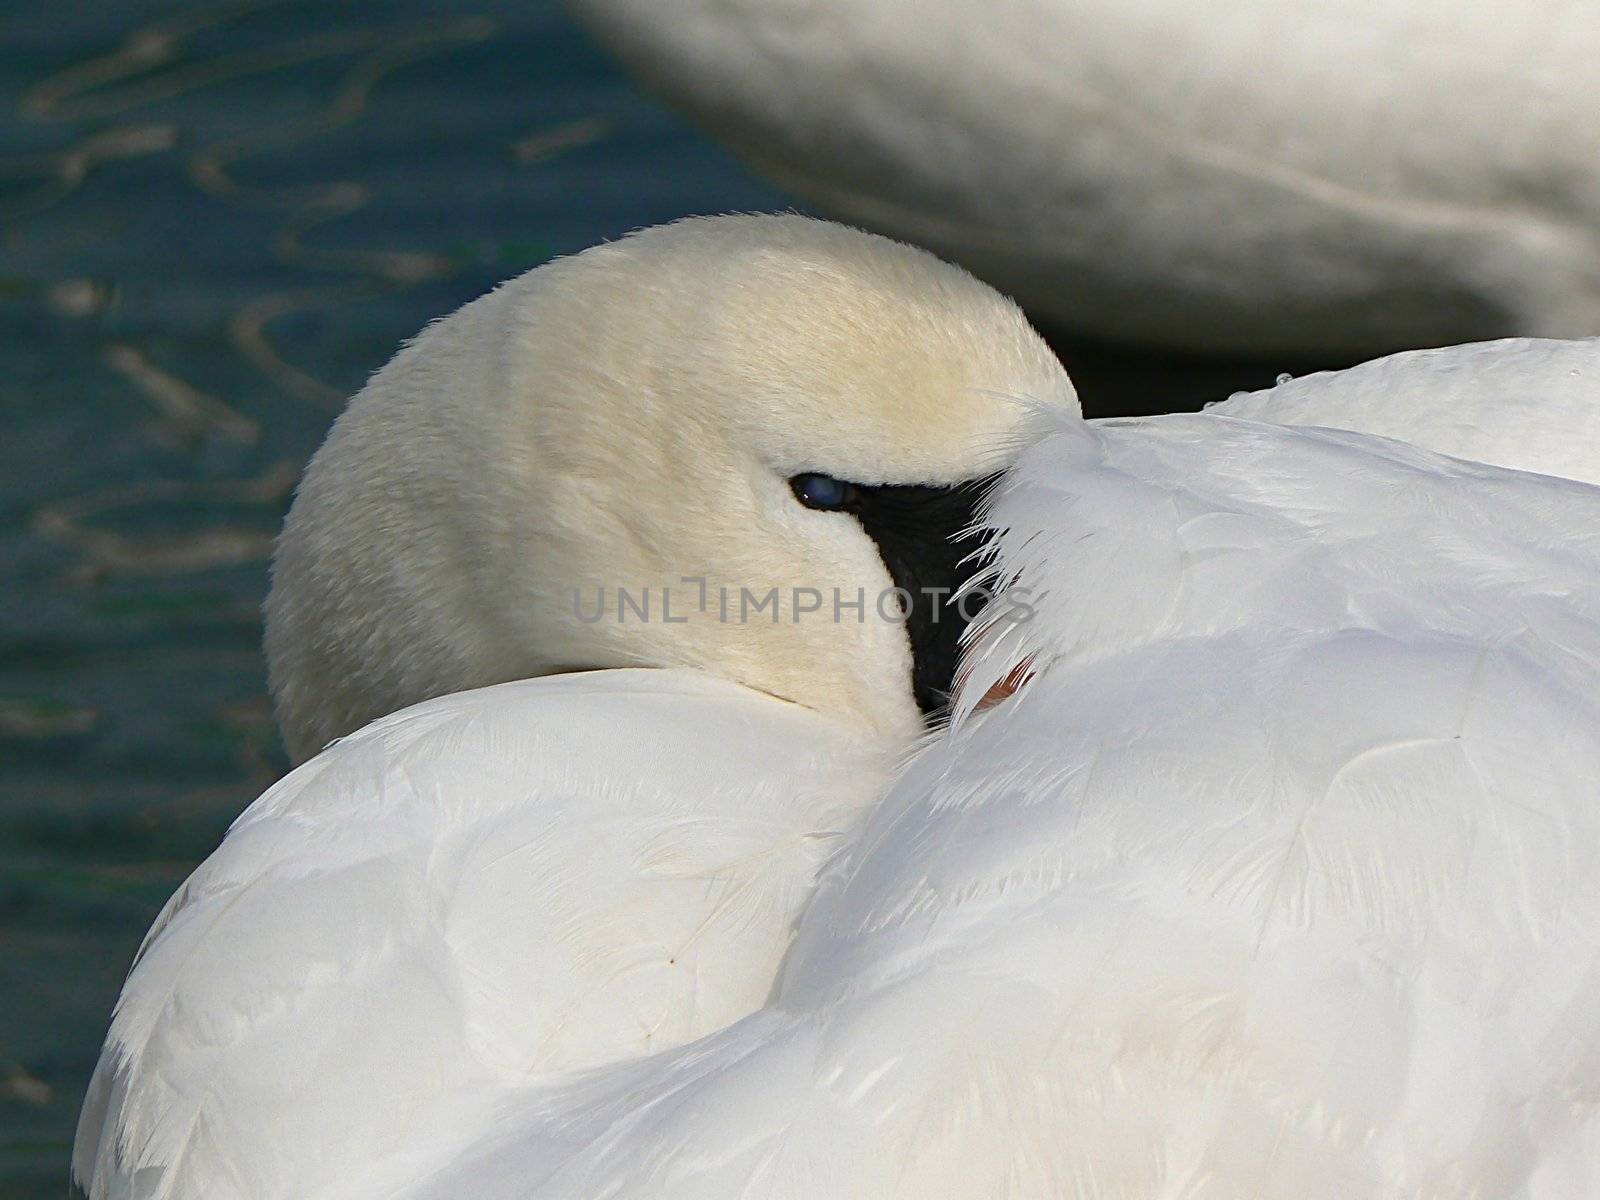 A swan which sleeps in its plumage